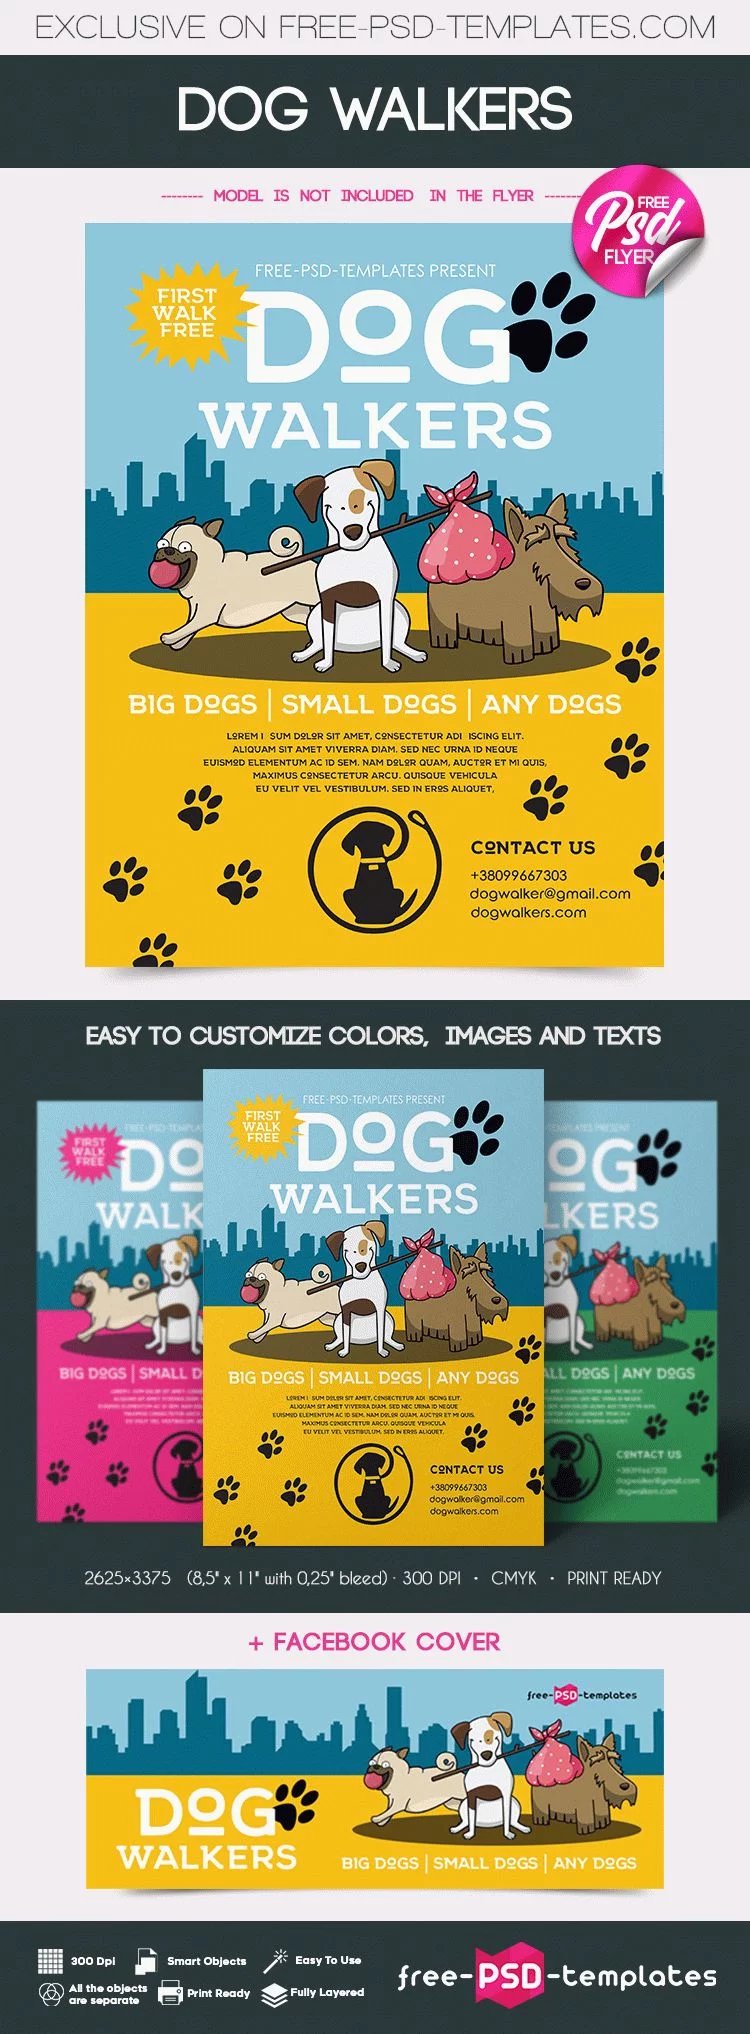 Free Dog Walkers Flyer in PSD